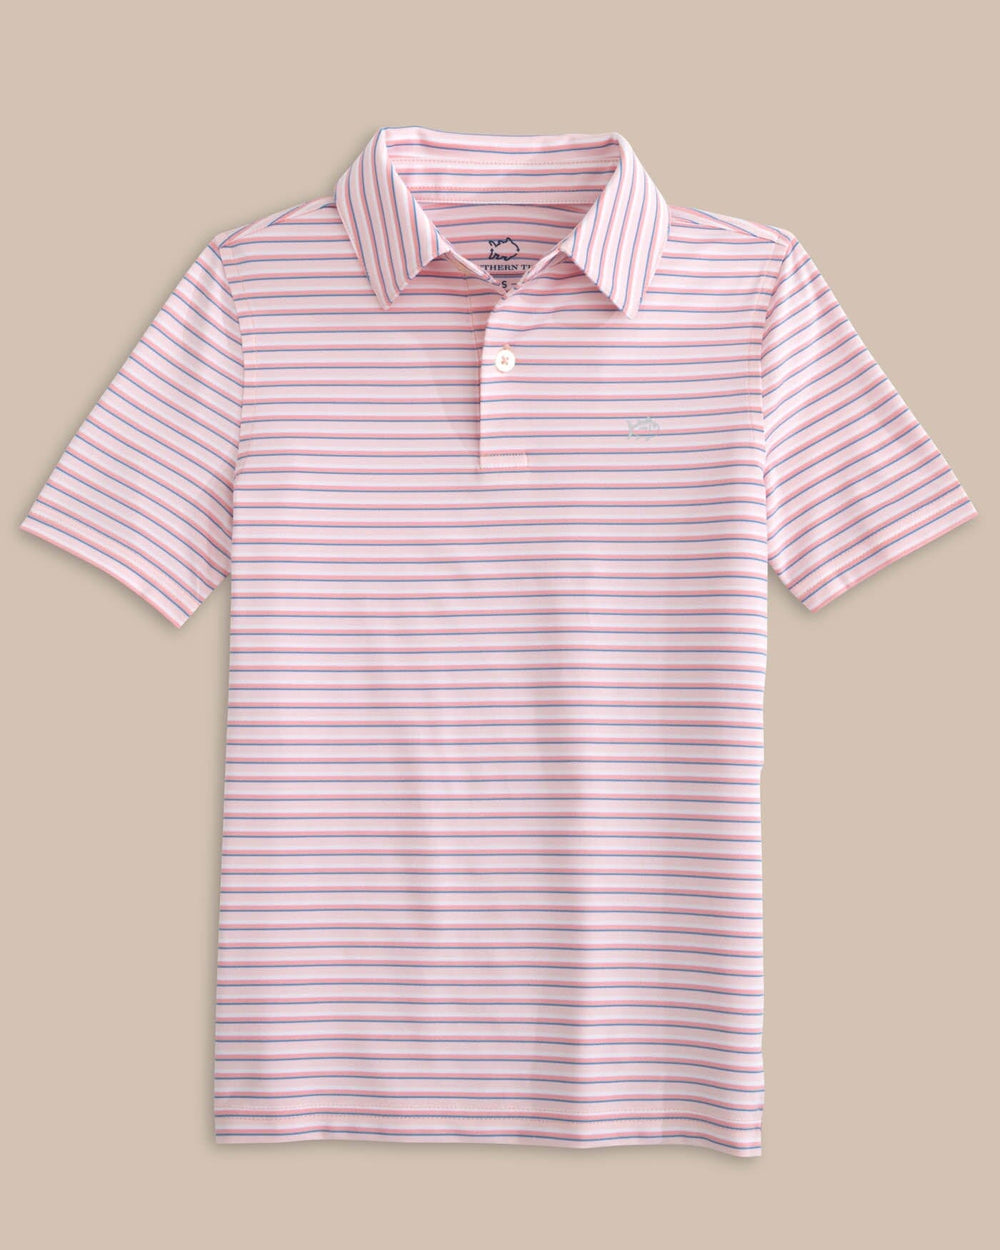 The front view of the Southern Tide Boys Driver Carova Stripe Polo Shirt by Southern Tide - Light Pink